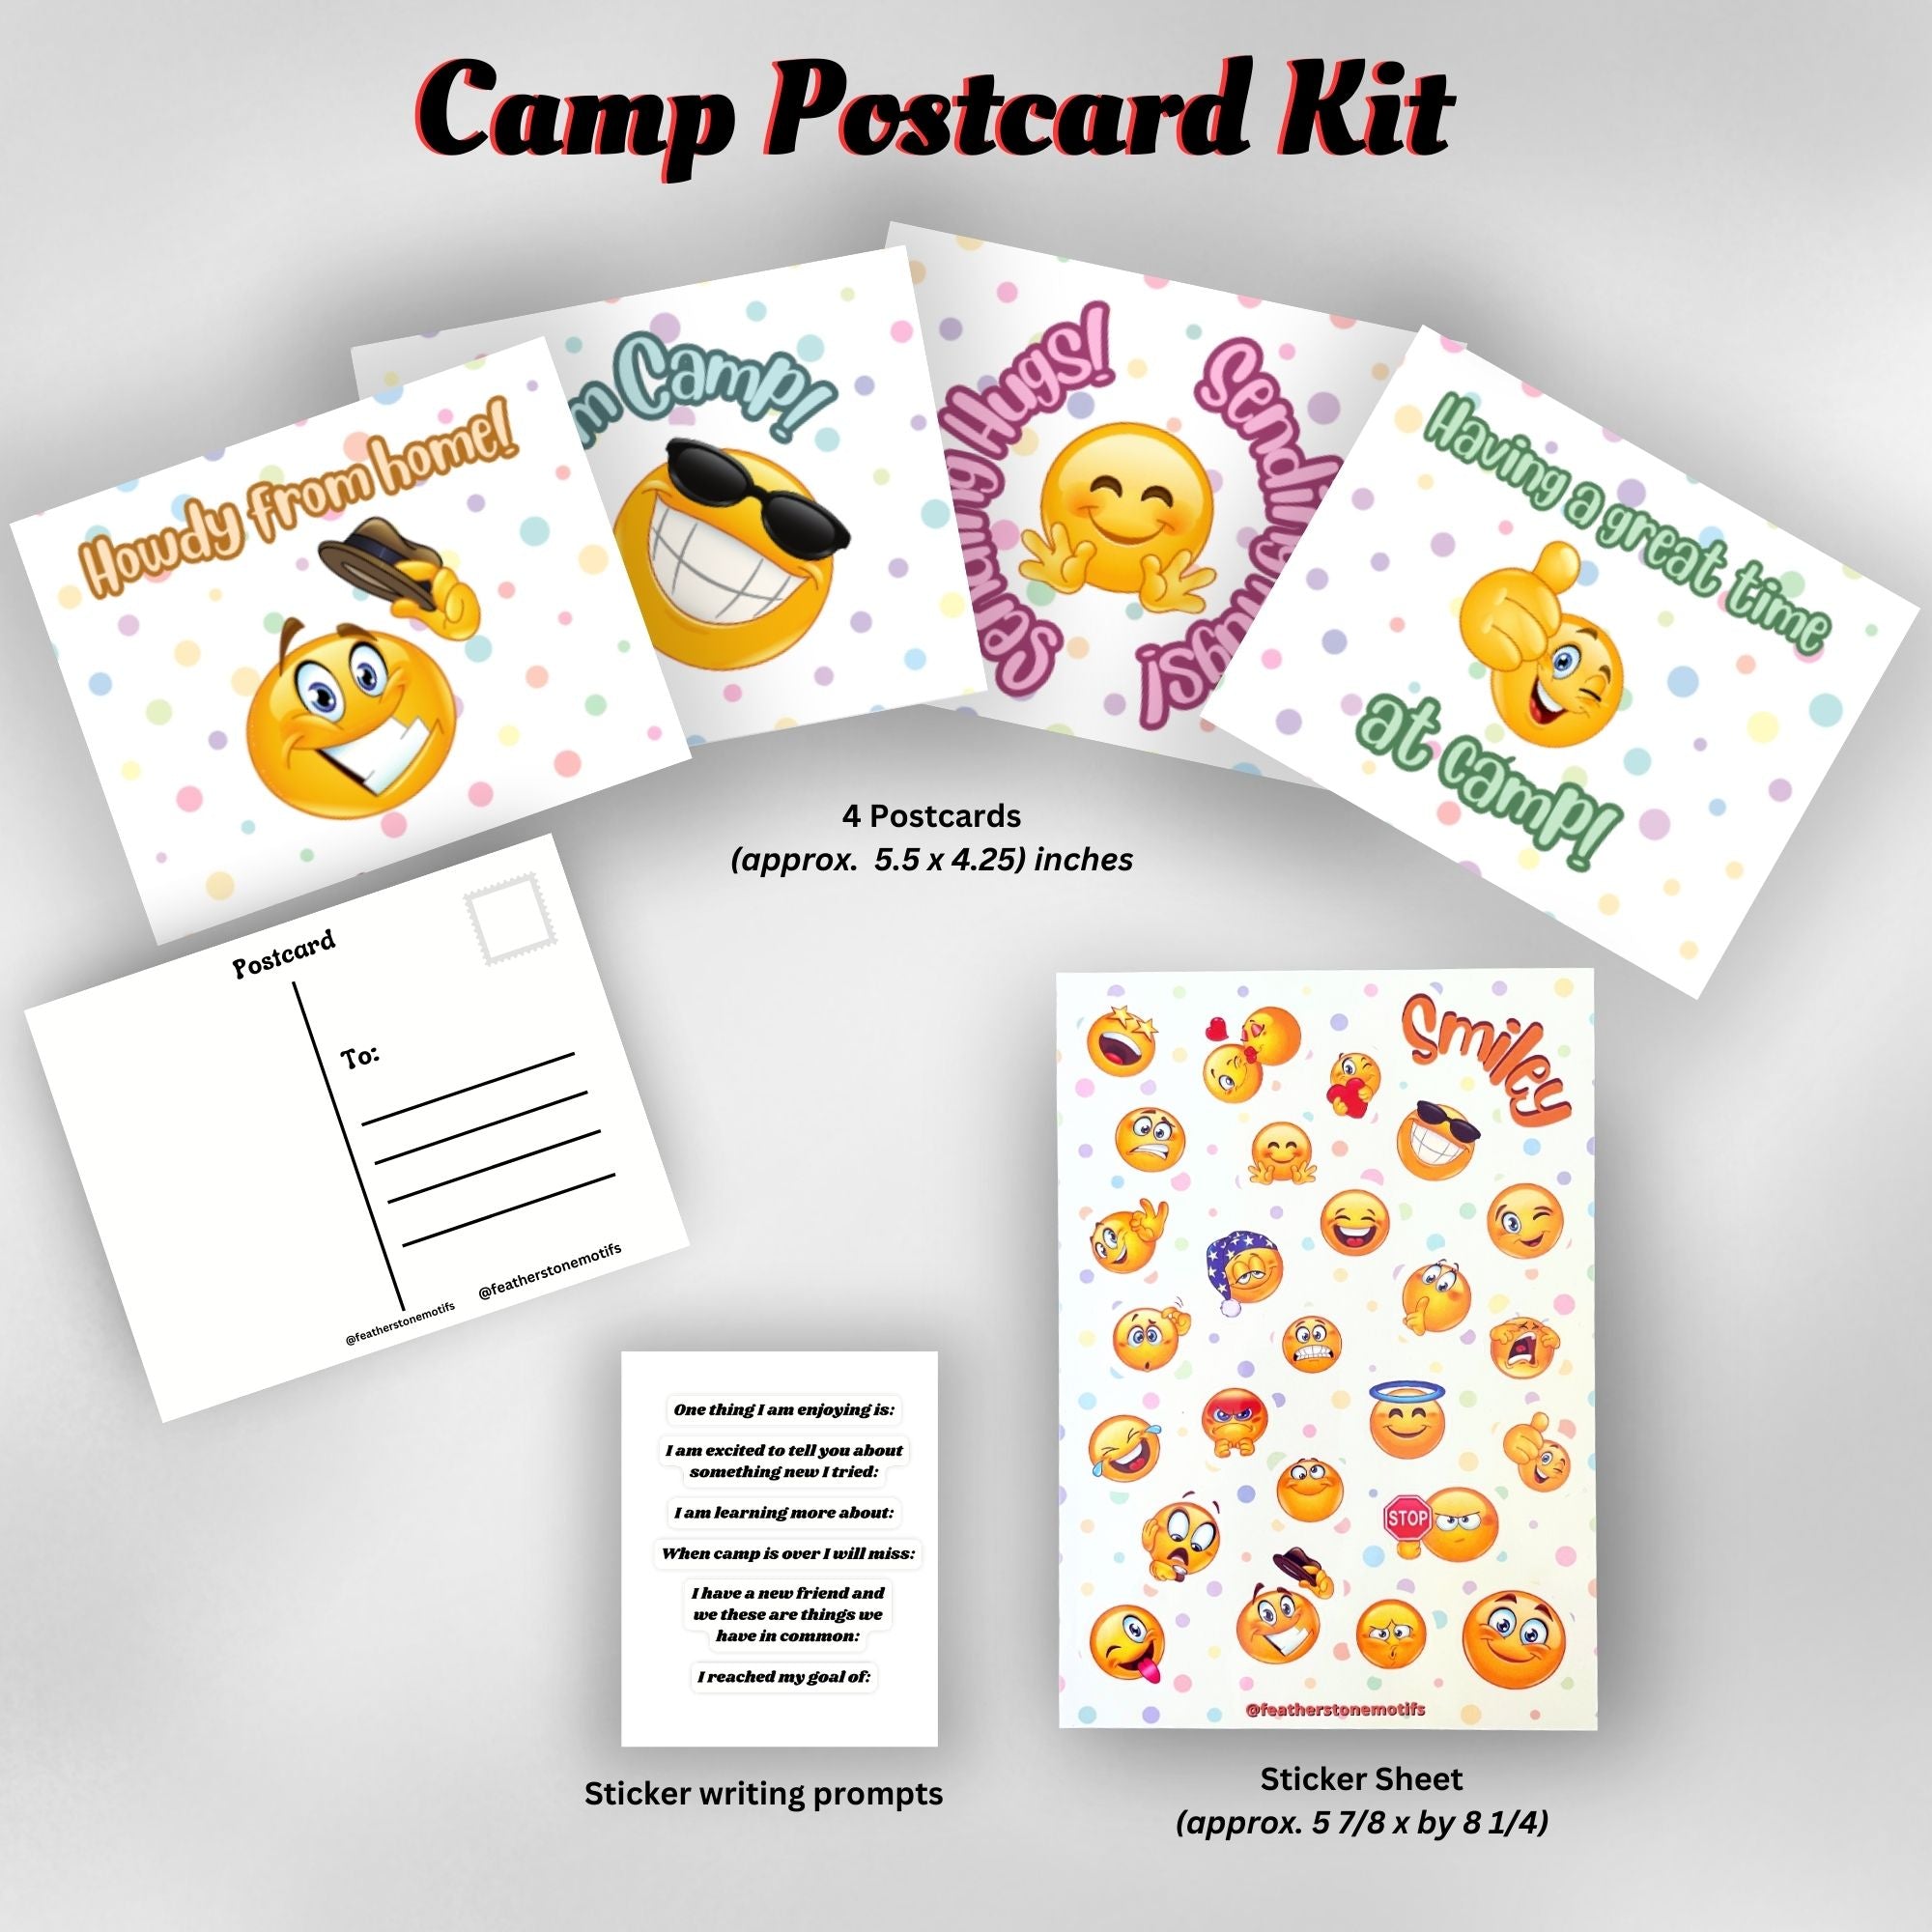 This image show the Smiley themed Camp Postcard Kit with dimensions and descriptions for each item.